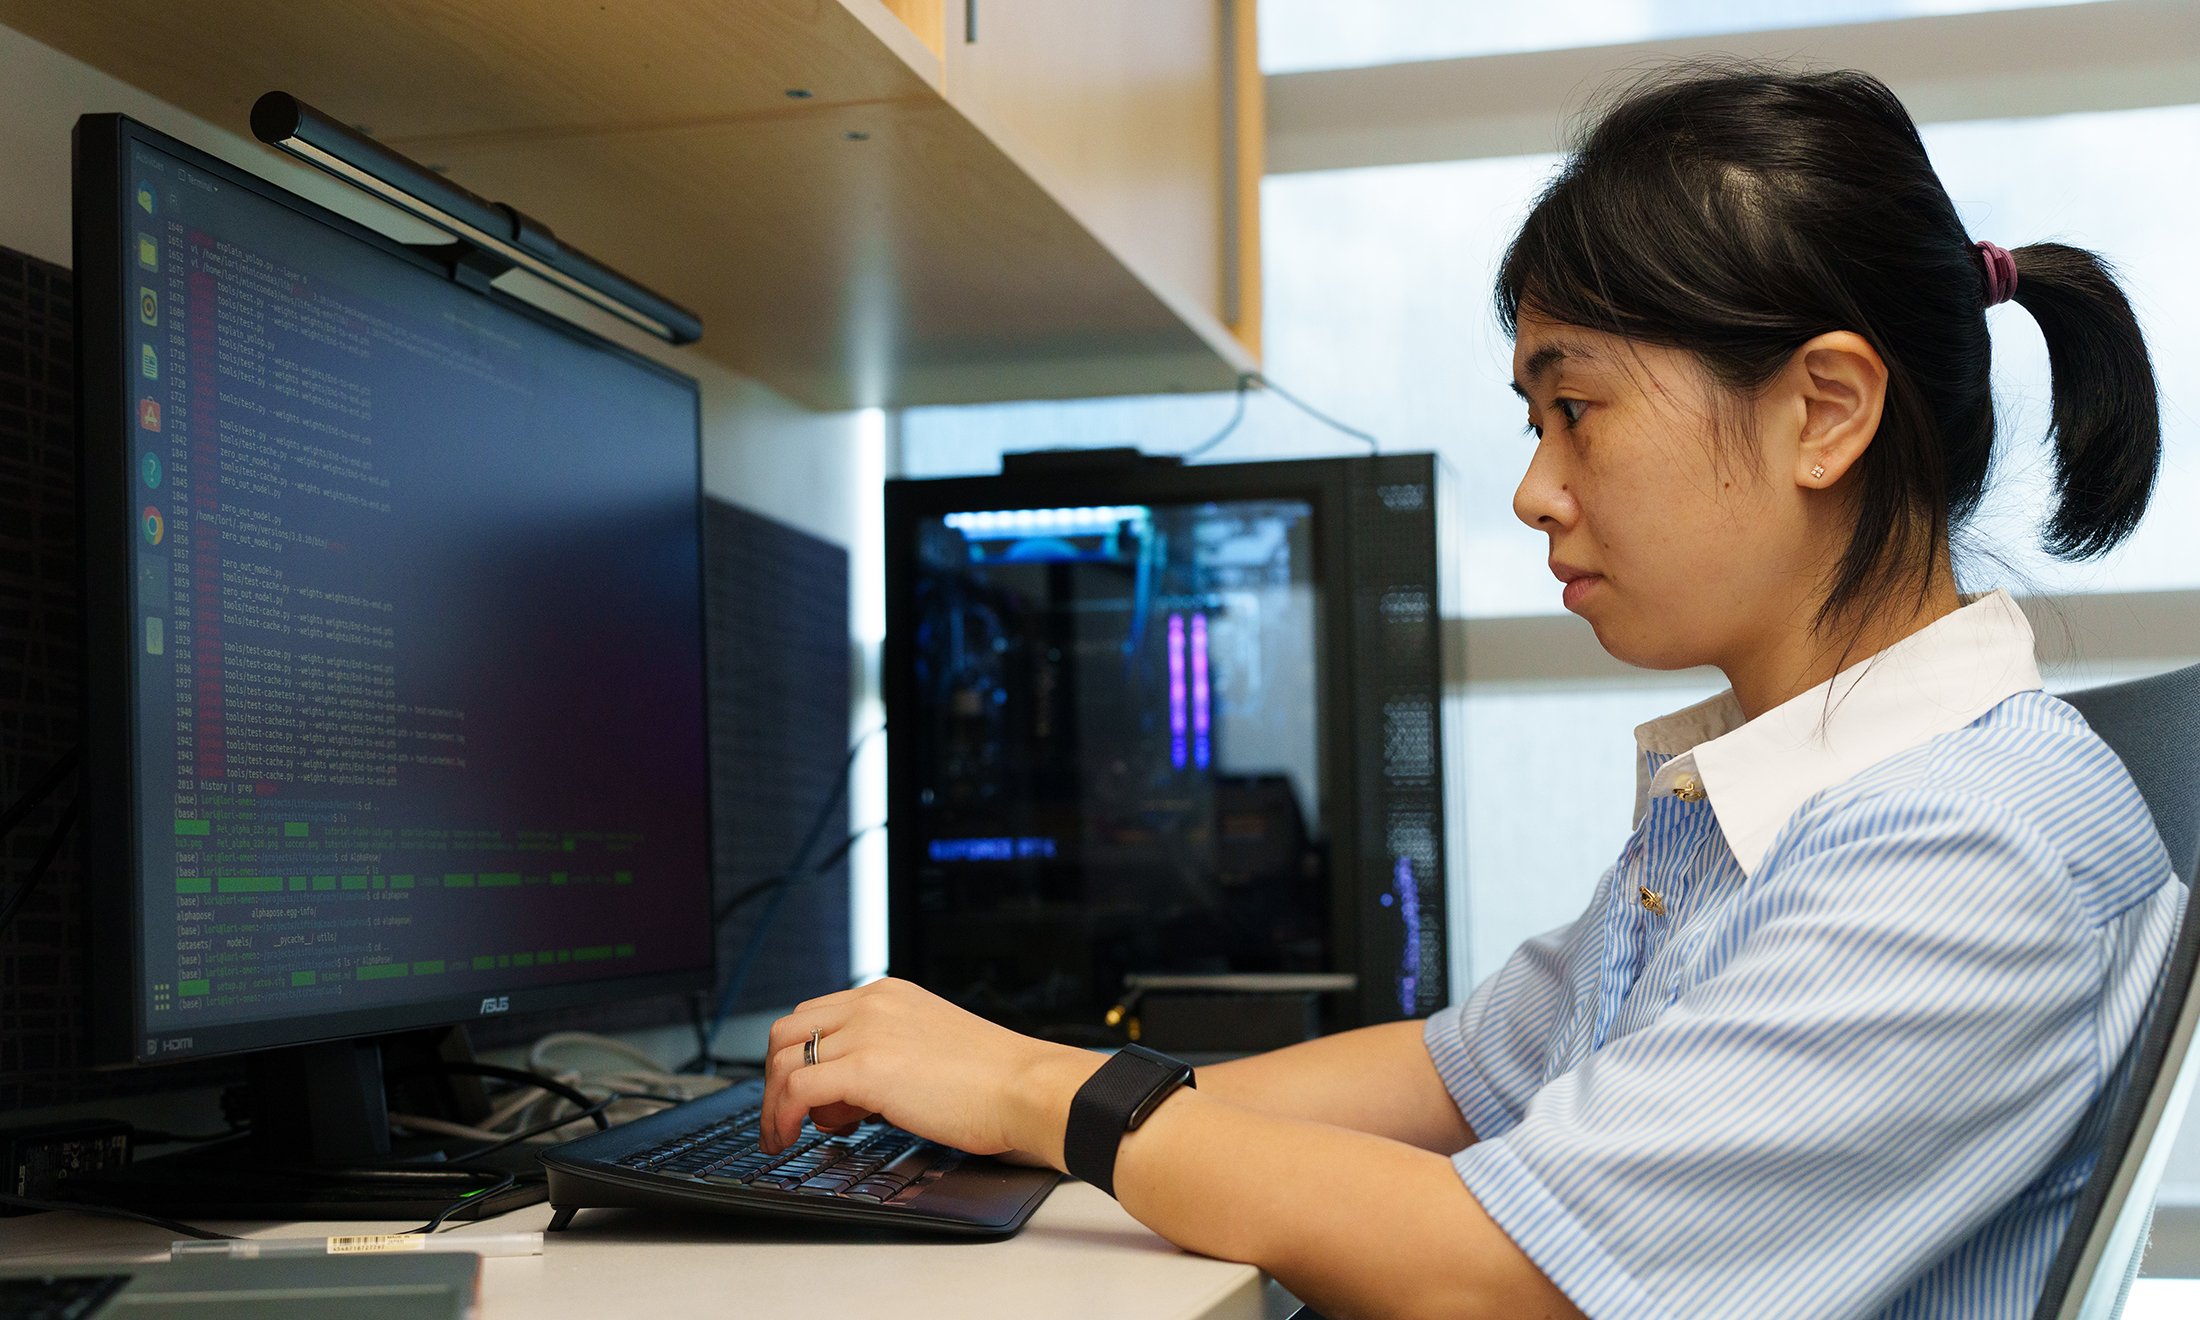 A student working at a computer